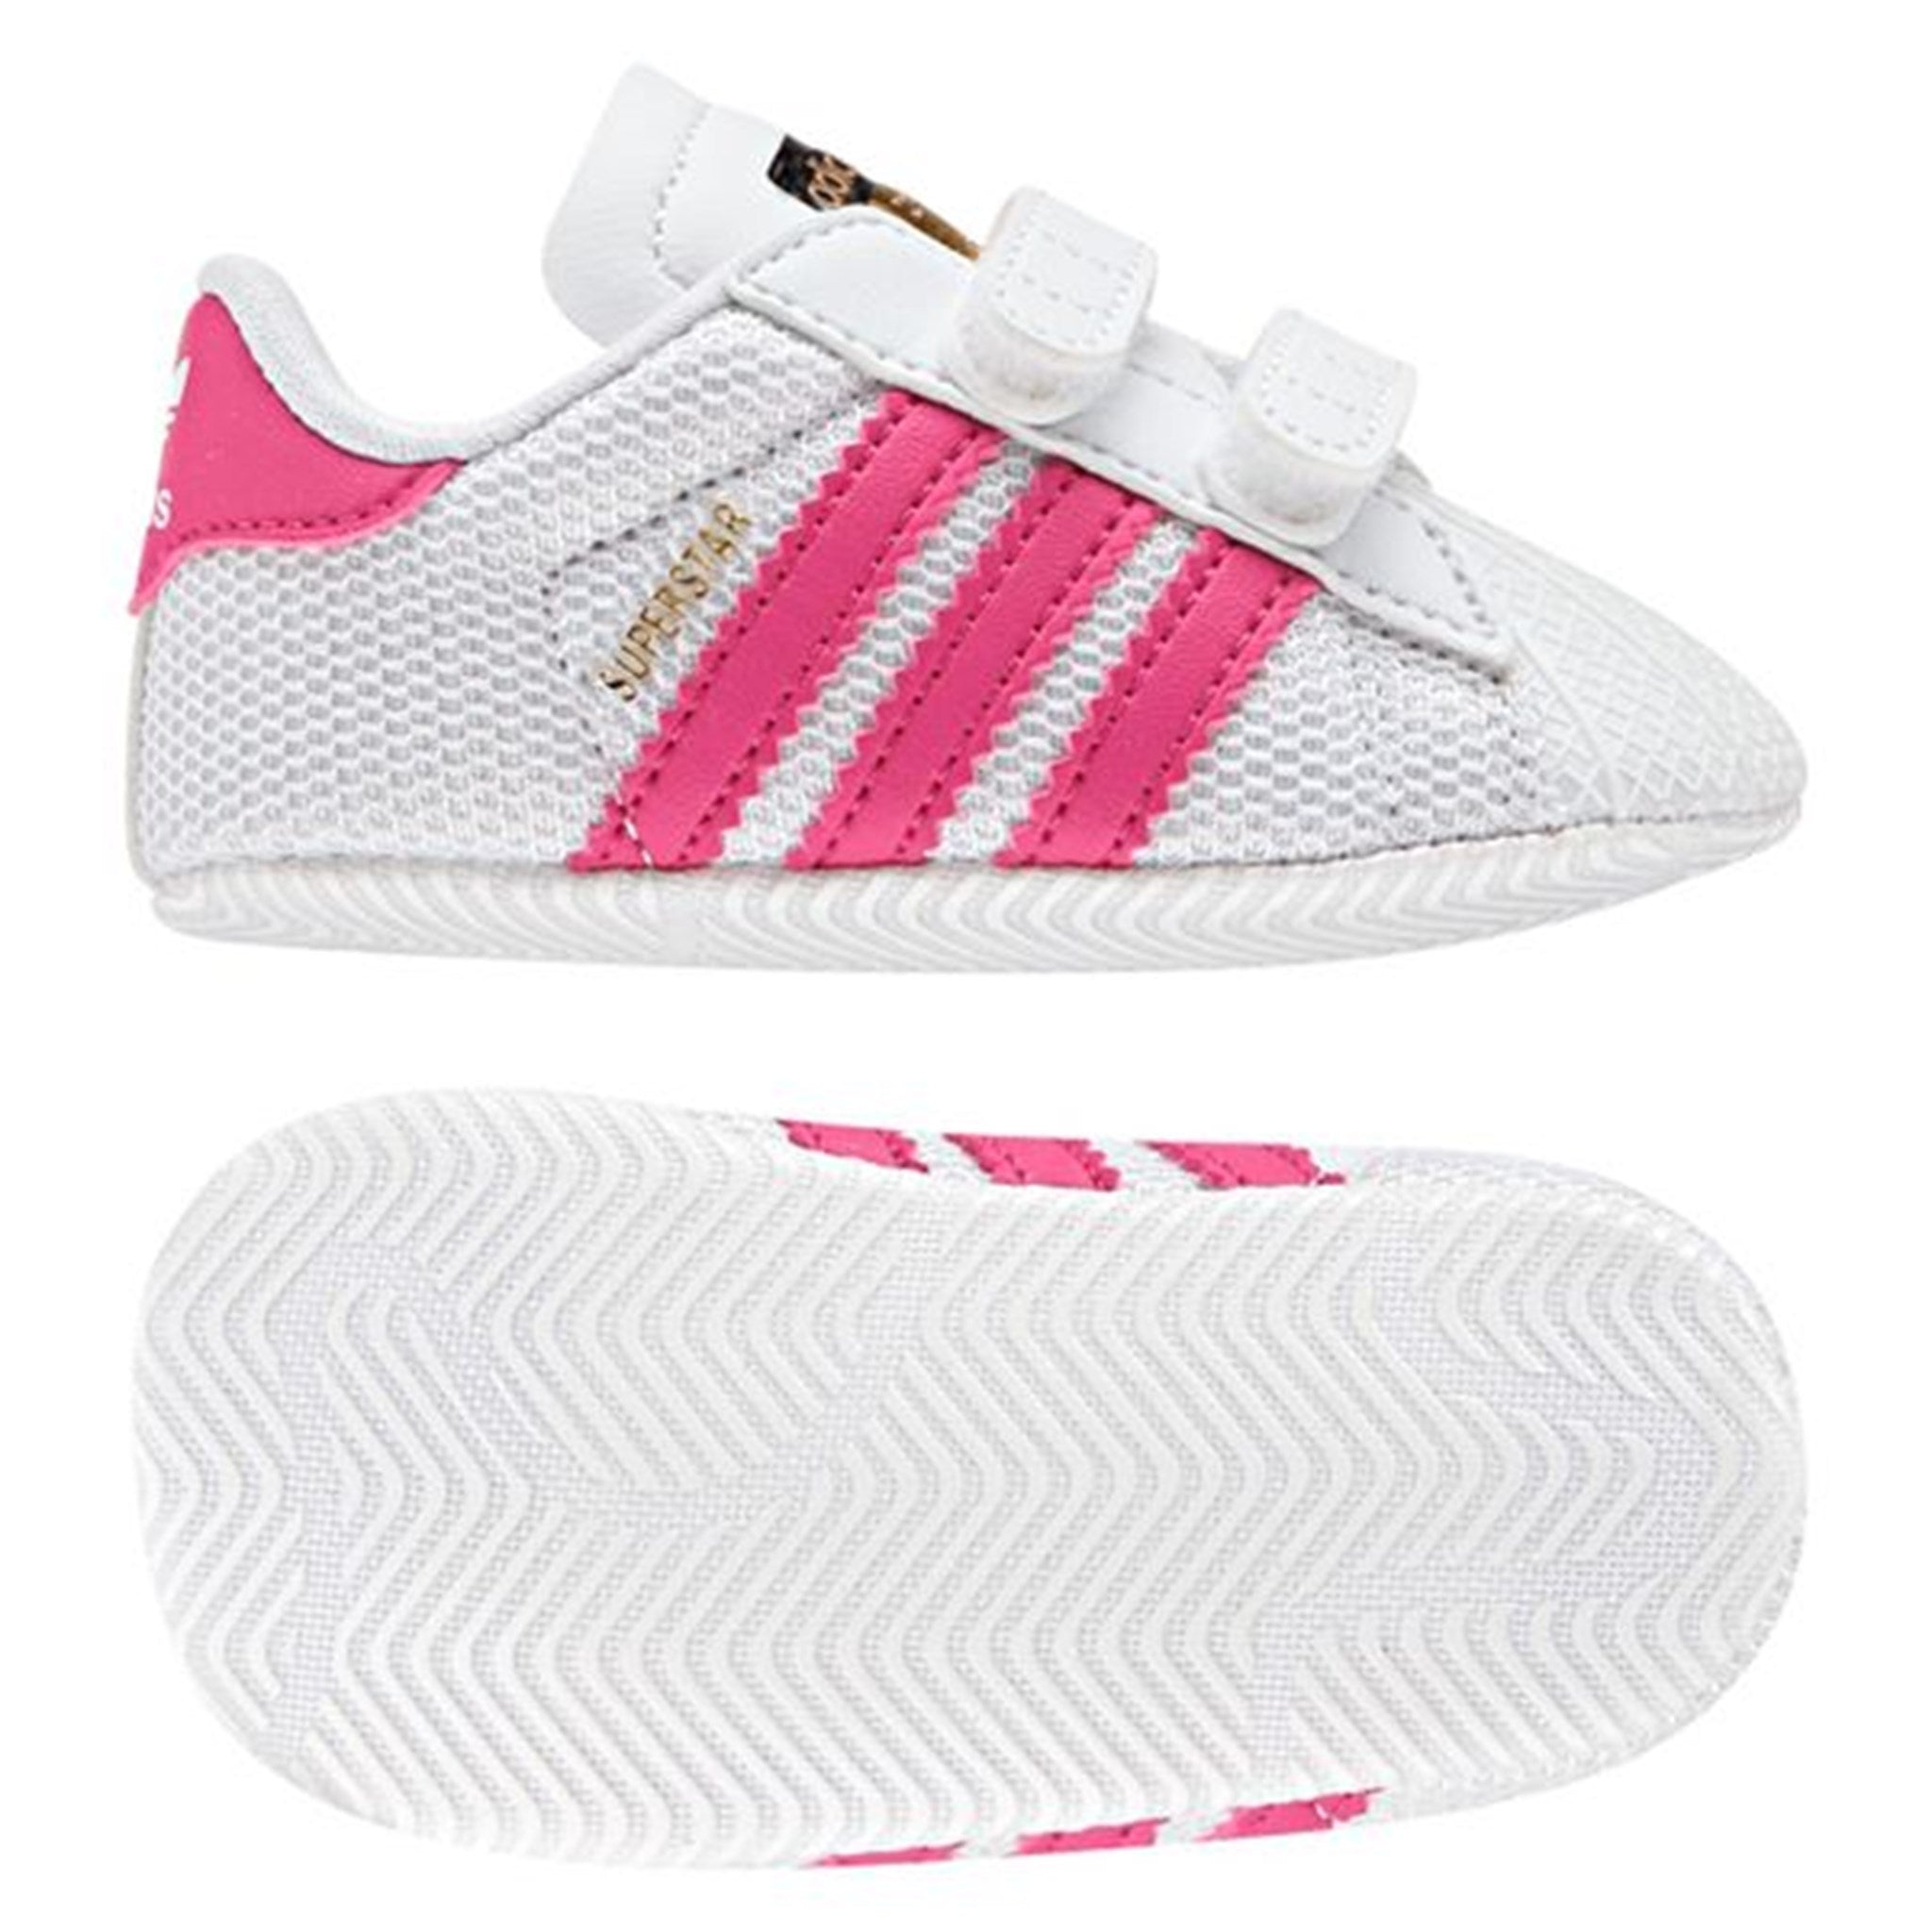 adidas Superstar Sneakers White/Pink S79917 5